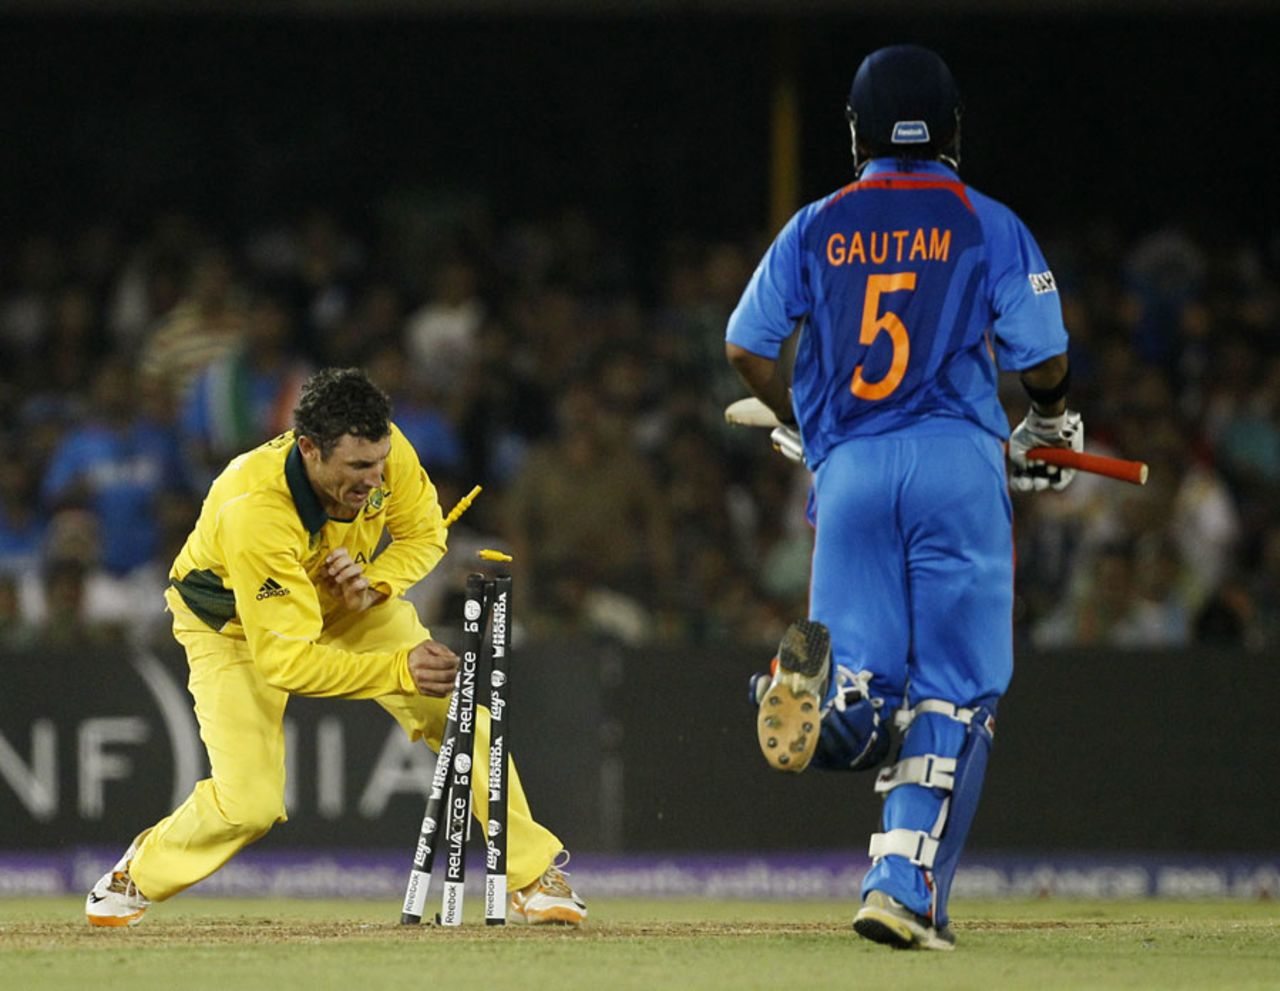 David Hussey whips off the bails to run out Gautam Gambhir, India v Australia, 2nd quarter-final, Ahmedabad, World Cup 2011, March 24, 2011